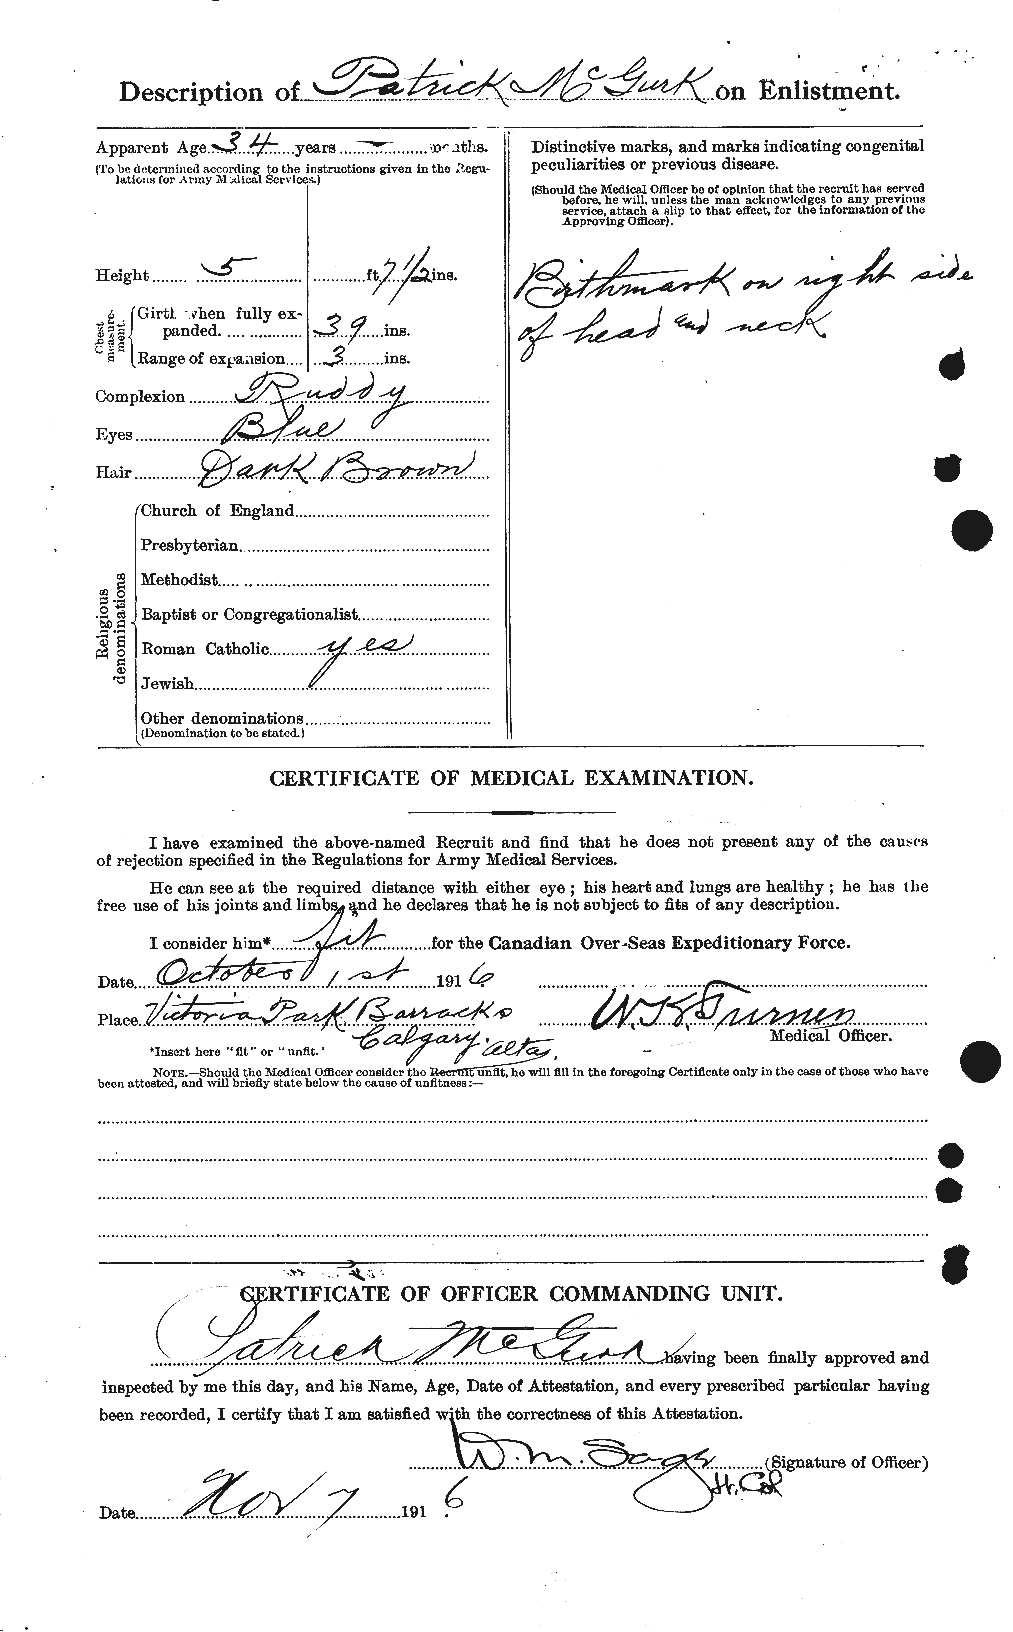 Personnel Records of the First World War - CEF 524177b